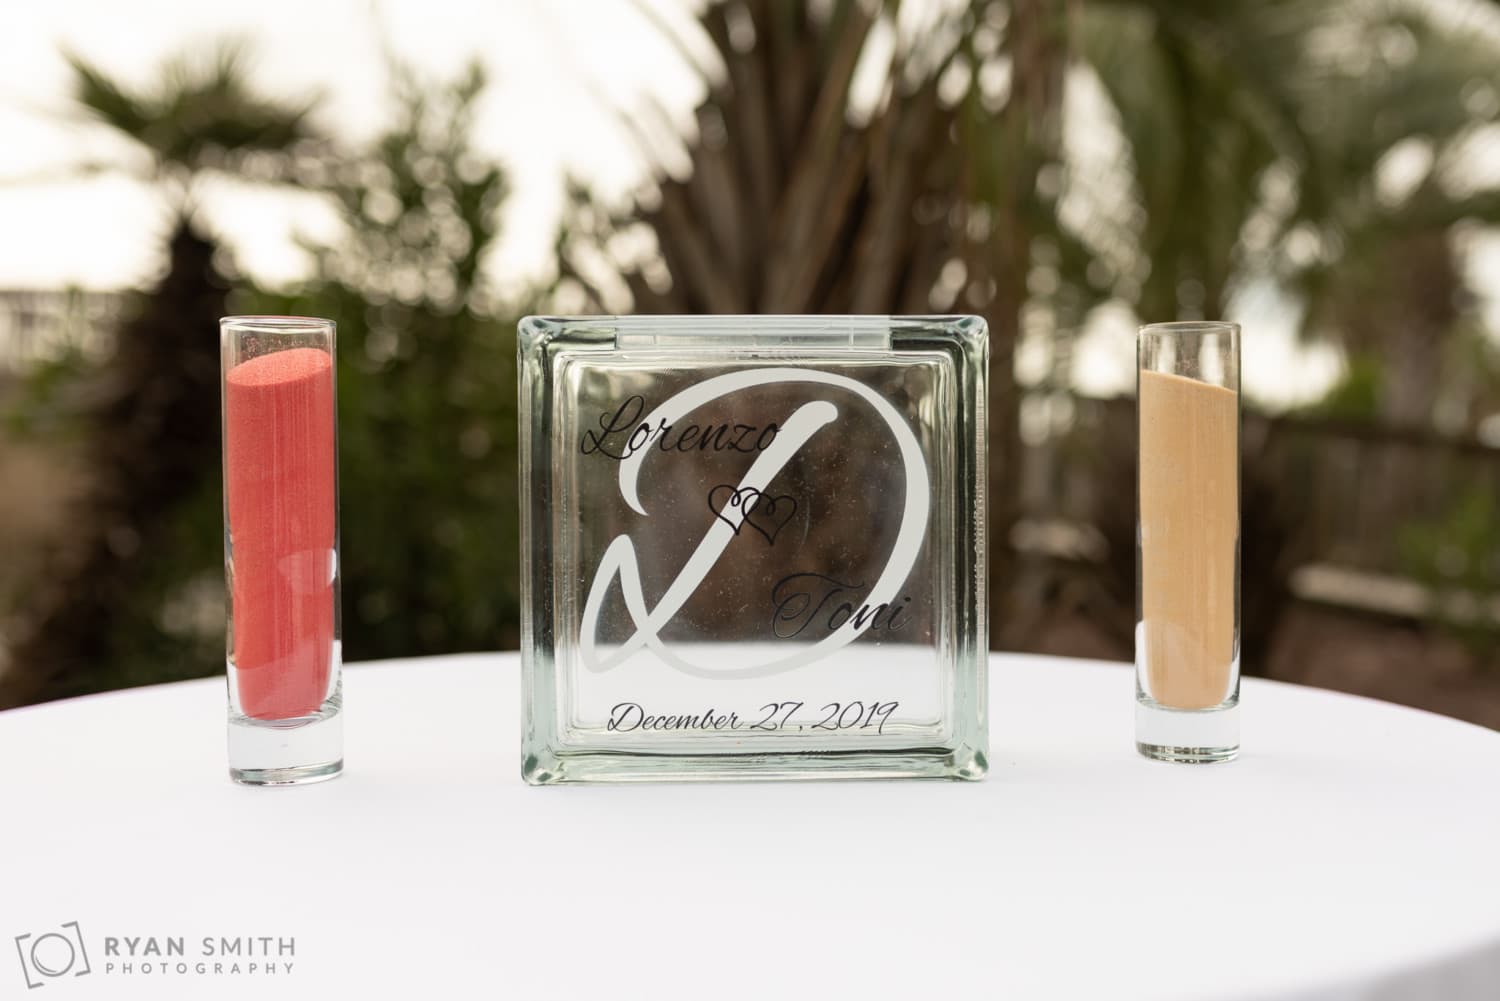 Sand ceremony containers - Doubletree Resort - Myrtle Beach